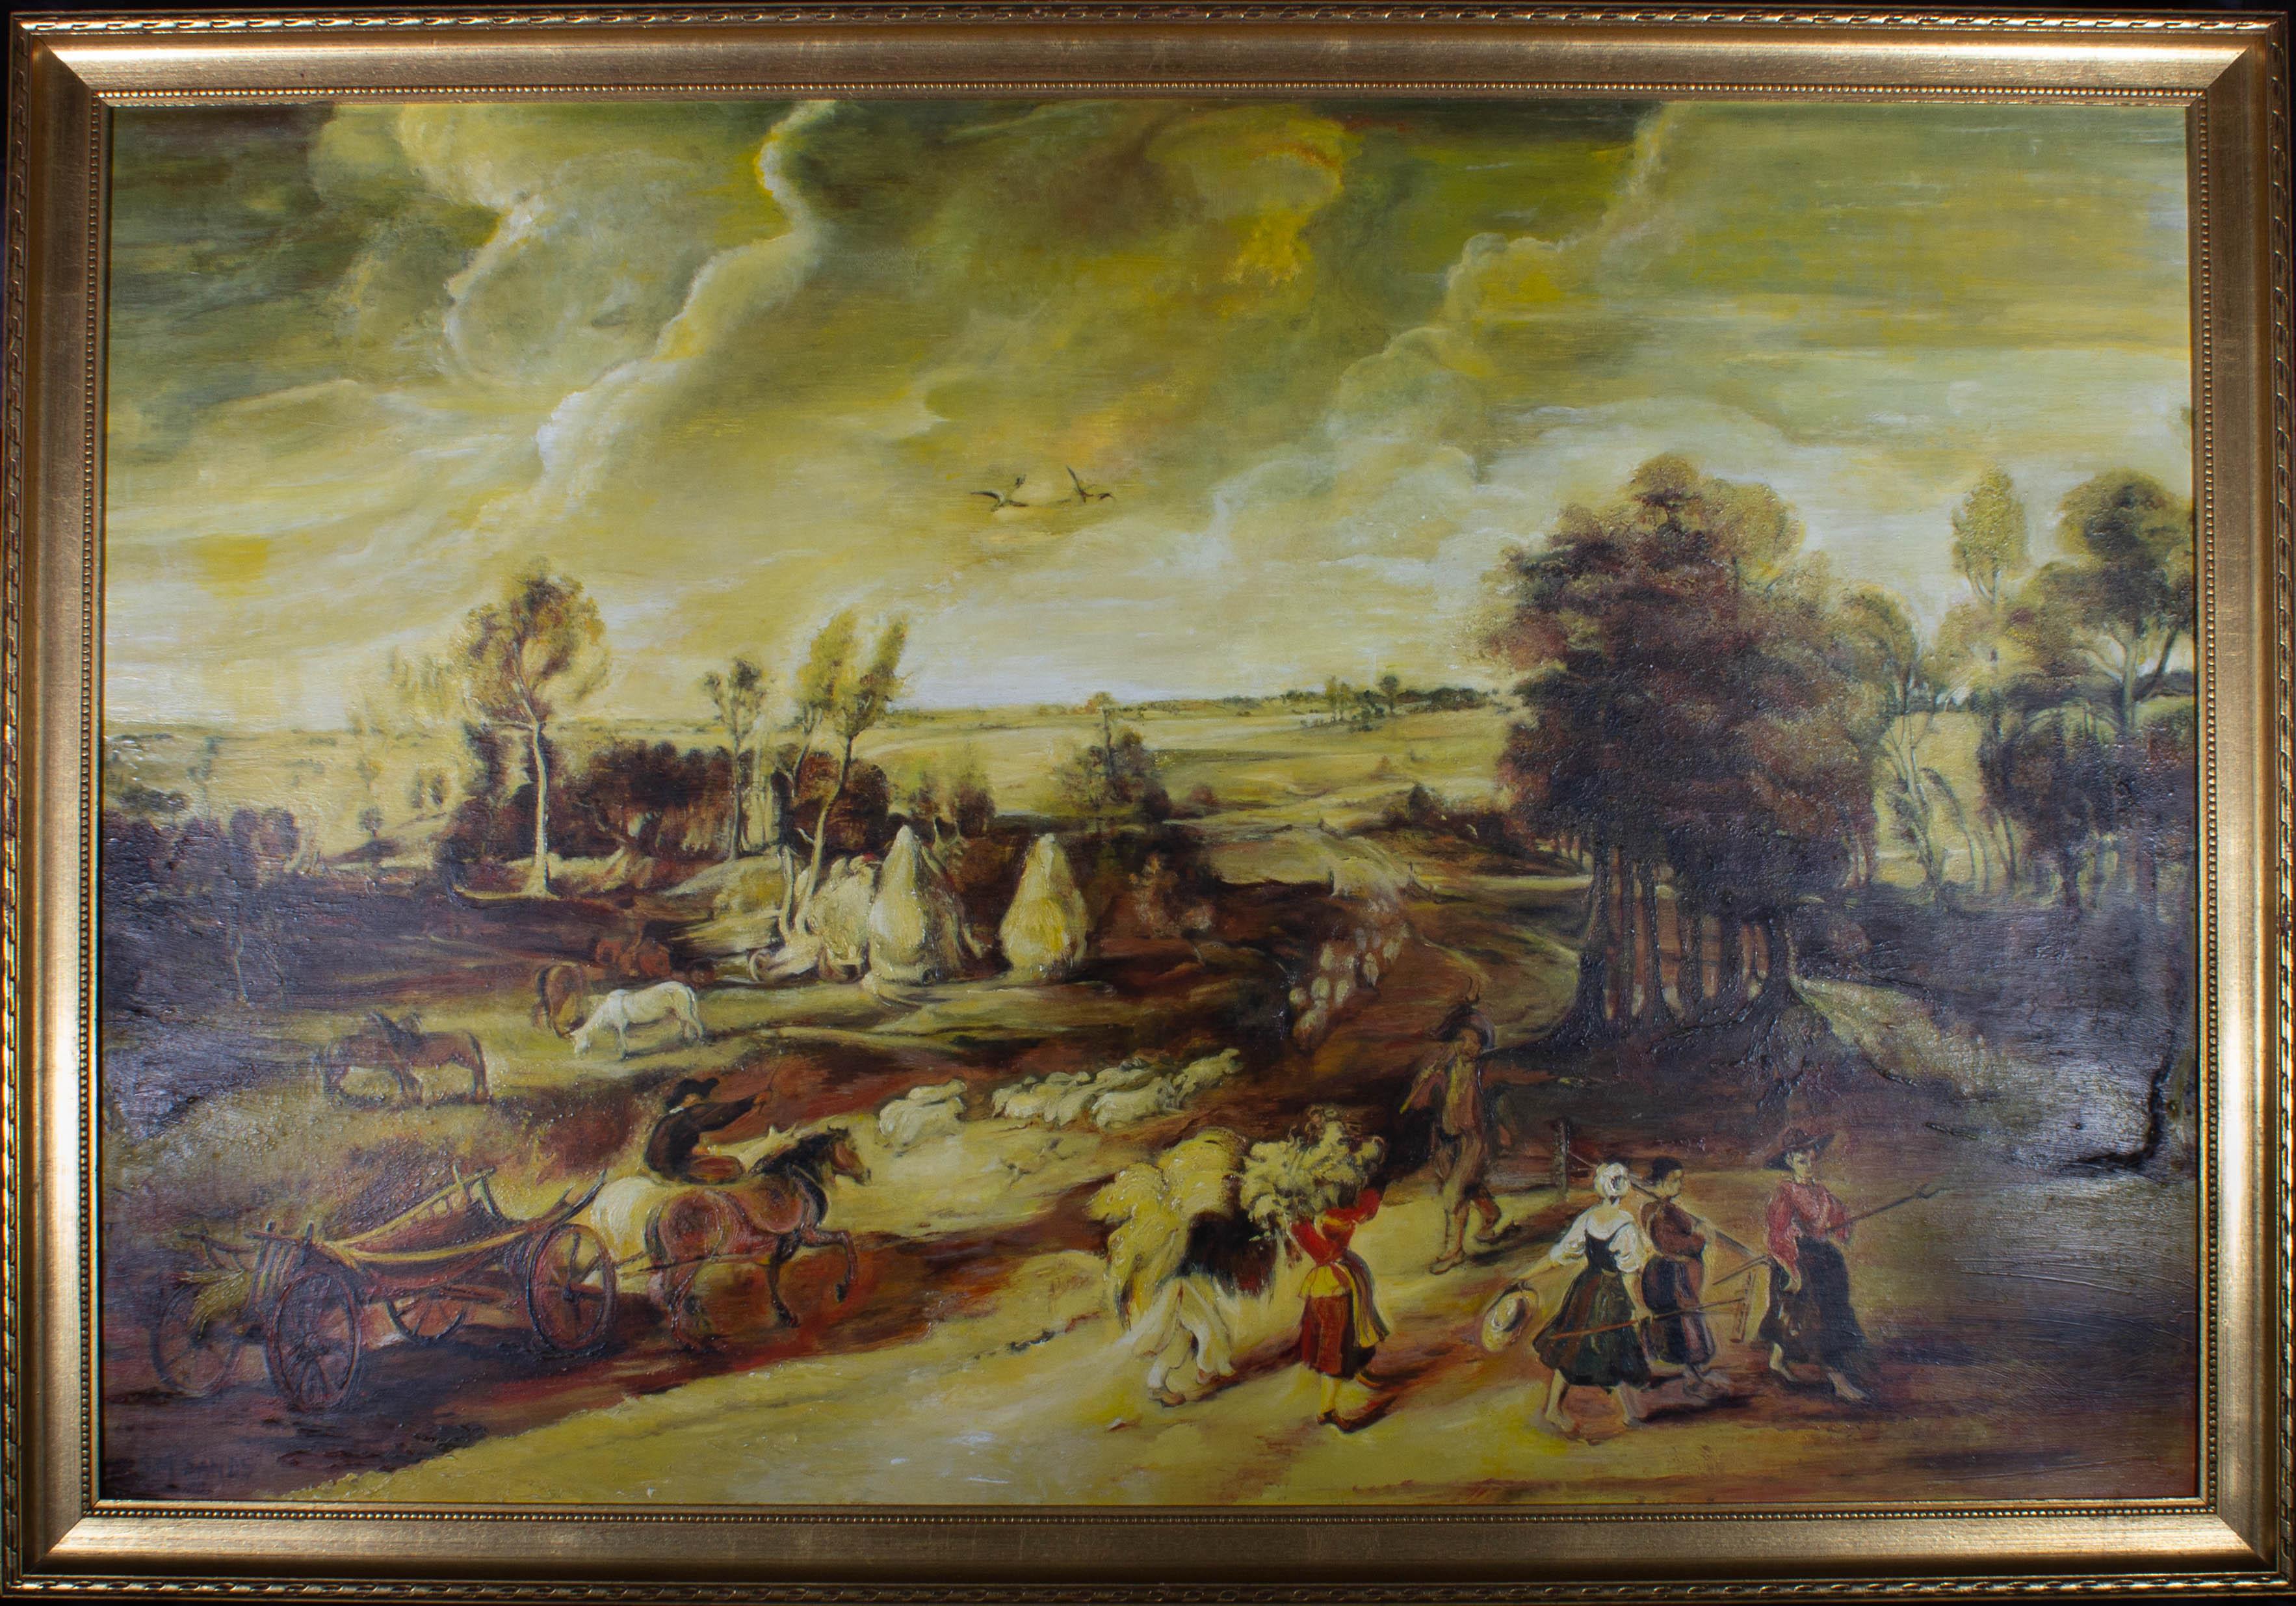 S.M. Sands after Peter Paul Rubens Landscape Painting - Sands after Rubens - Large 20th Century Oil, Peasants Returning from the Fields